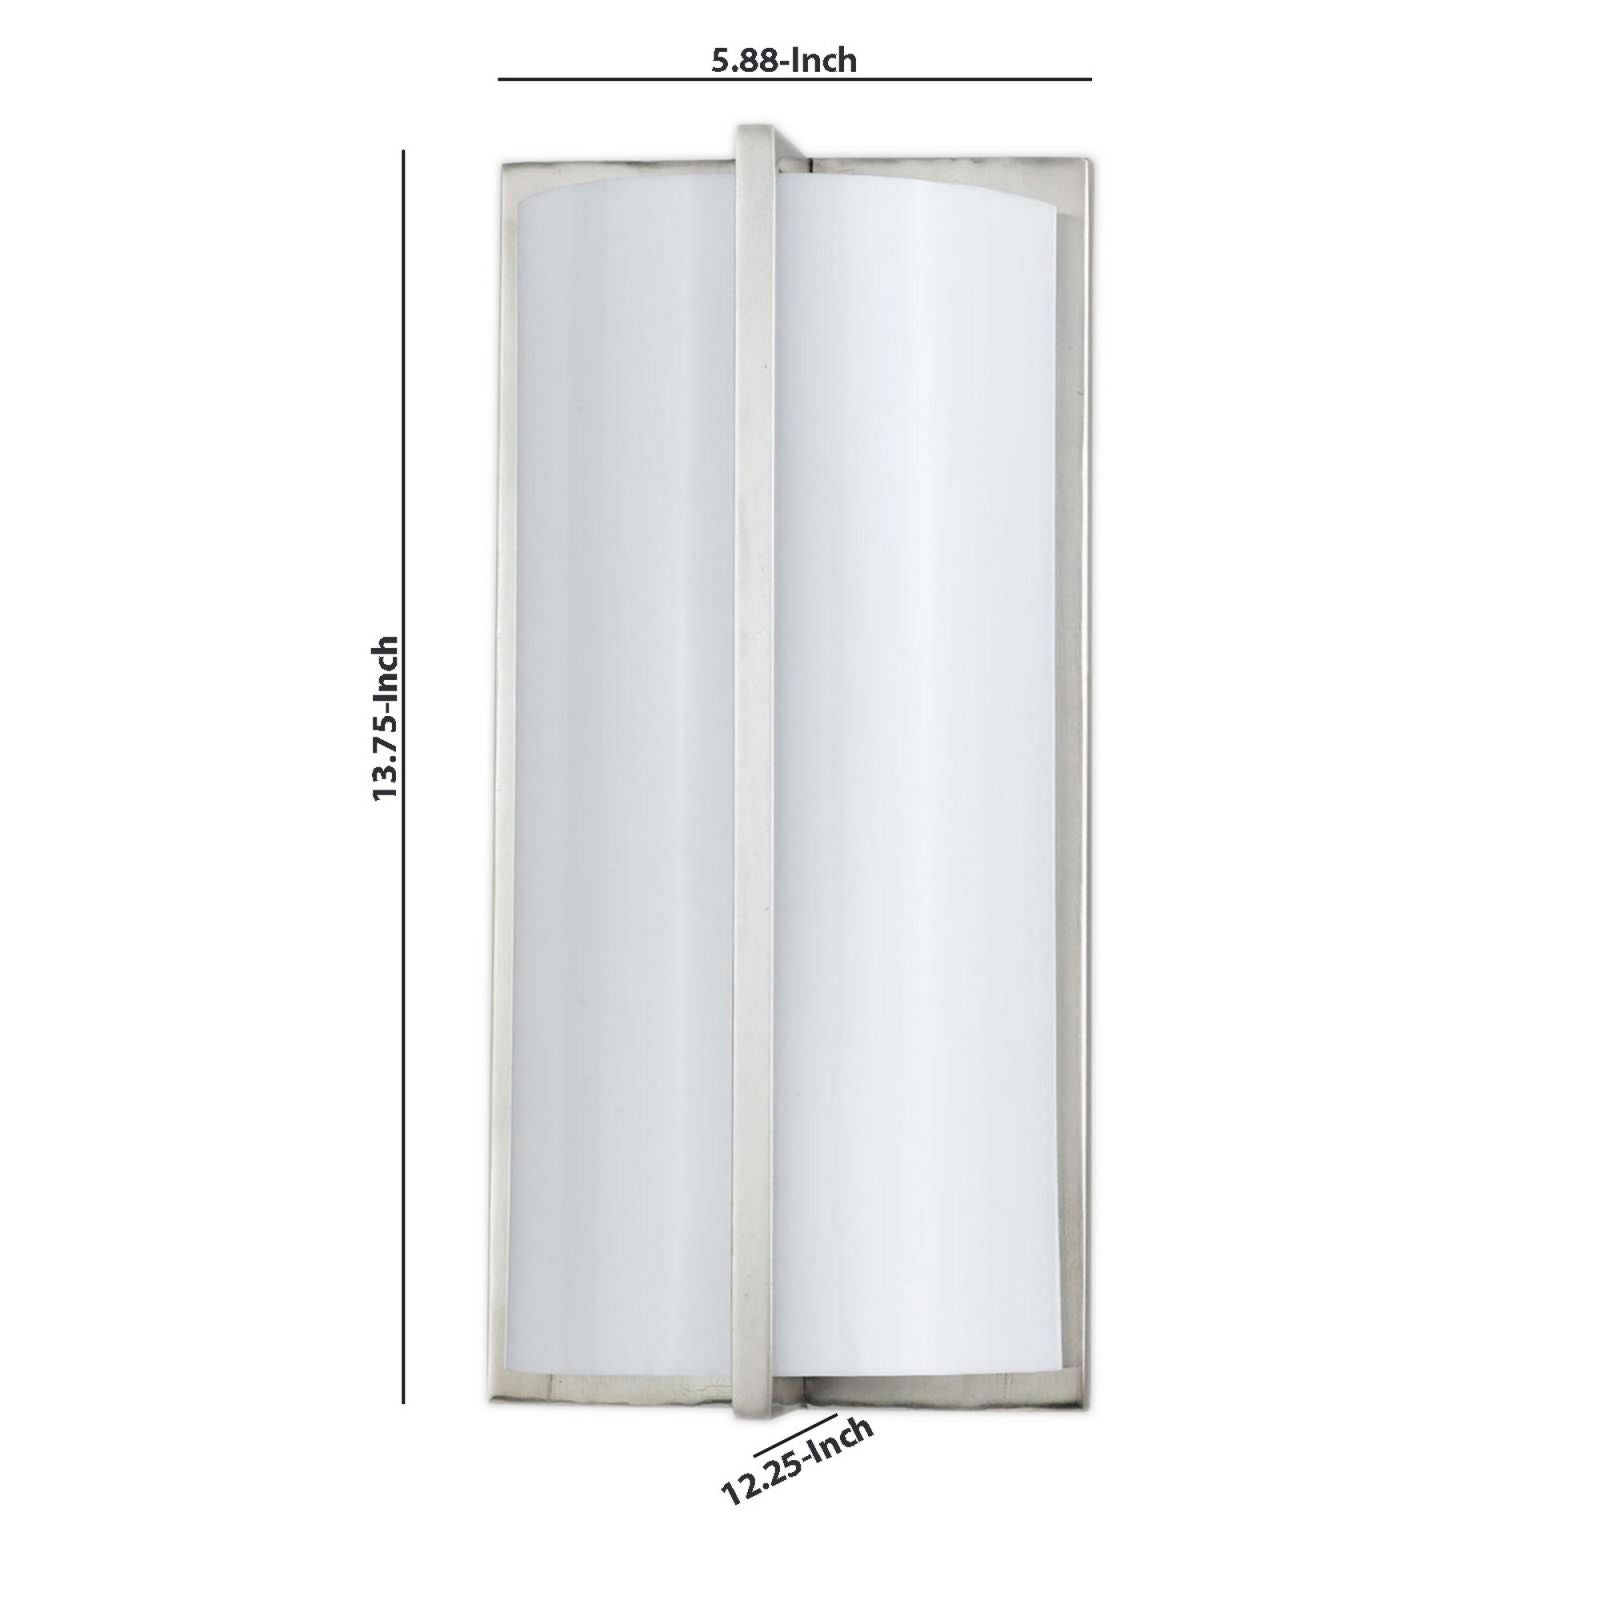 Cylindrical Shape Plc Wall Lamp With 3D Design, Set Of 4, Silver And White By Benzara